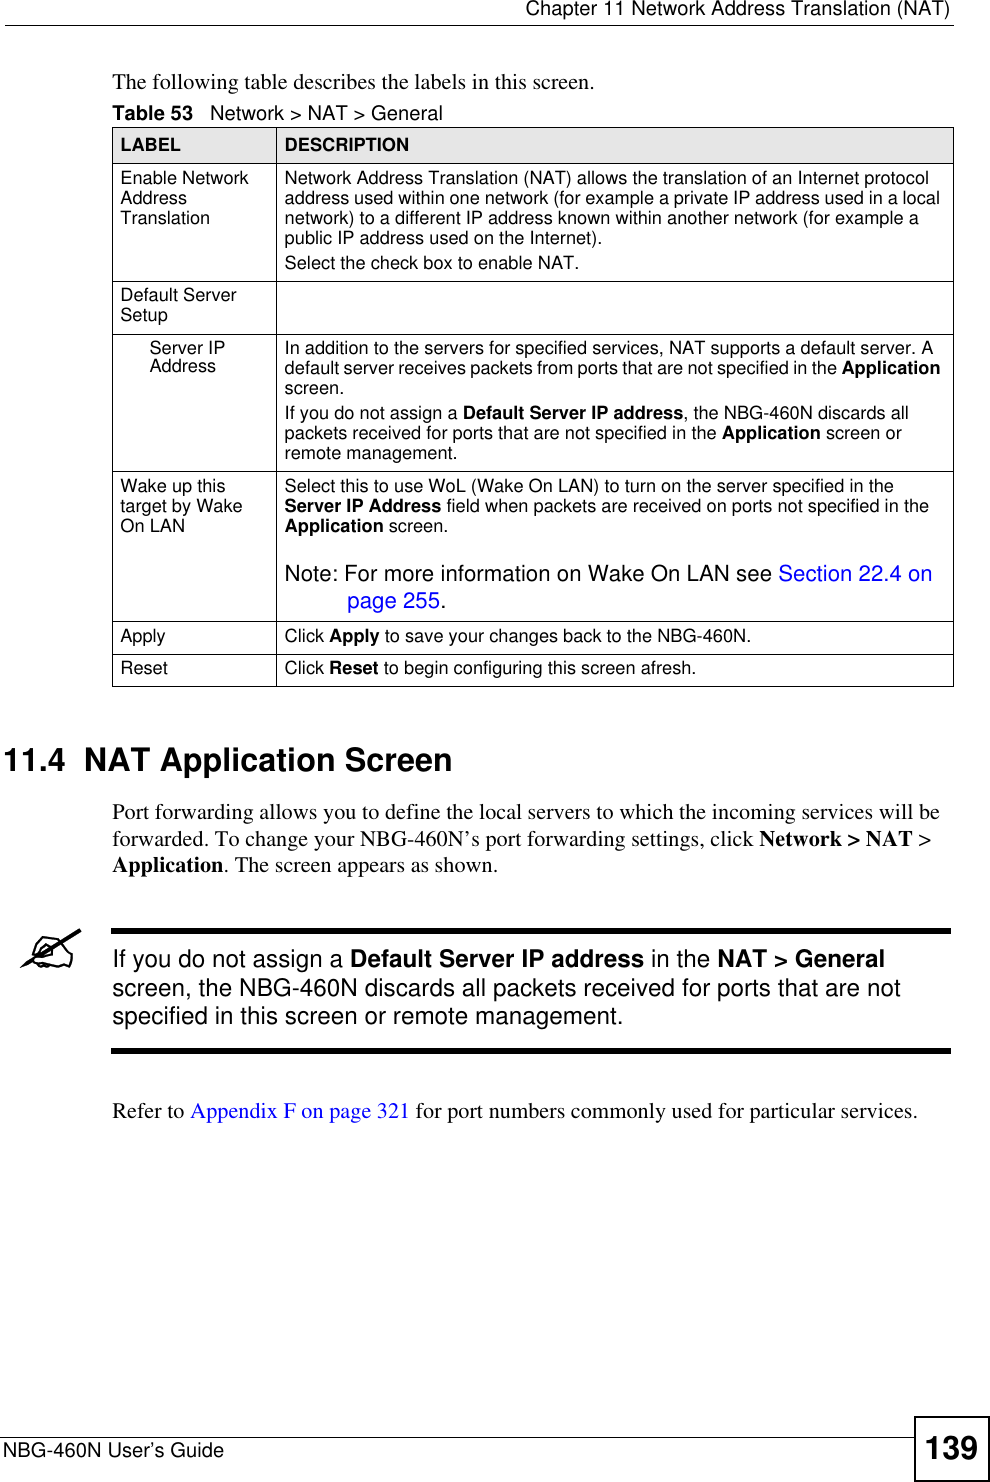  Chapter 11 Network Address Translation (NAT)NBG-460N User’s Guide 139The following table describes the labels in this screen.11.4  NAT Application ScreenPort forwarding allows you to define the local servers to which the incoming services will be forwarded. To change your NBG-460N’s port forwarding settings, click Network &gt; NAT &gt; Application. The screen appears as shown.&quot;If you do not assign a Default Server IP address in the NAT &gt; Generalscreen, the NBG-460N discards all packets received for ports that are not specified in this screen or remote management.Refer to Appendix F on page 321 for port numbers commonly used for particular services.Table 53   Network &gt; NAT &gt; GeneralLABEL DESCRIPTIONEnable Network Address TranslationNetwork Address Translation (NAT) allows the translation of an Internet protocol address used within one network (for example a private IP address used in a local network) to a different IP address known within another network (for example a public IP address used on the Internet). Select the check box to enable NAT.Default Server SetupServer IP Address In addition to the servers for specified services, NAT supports a default server. A default server receives packets from ports that are not specified in the Applicationscreen.If you do not assign a Default Server IP address, the NBG-460N discards all packets received for ports that are not specified in the Application screen or remote management.Wake up this target by Wake On LANSelect this to use WoL (Wake On LAN) to turn on the server specified in the Server IP Address field when packets are received on ports not specified in the Application screen. Note: For more information on Wake On LAN see Section 22.4 on page 255.Apply Click Apply to save your changes back to the NBG-460N.Reset Click Reset to begin configuring this screen afresh.